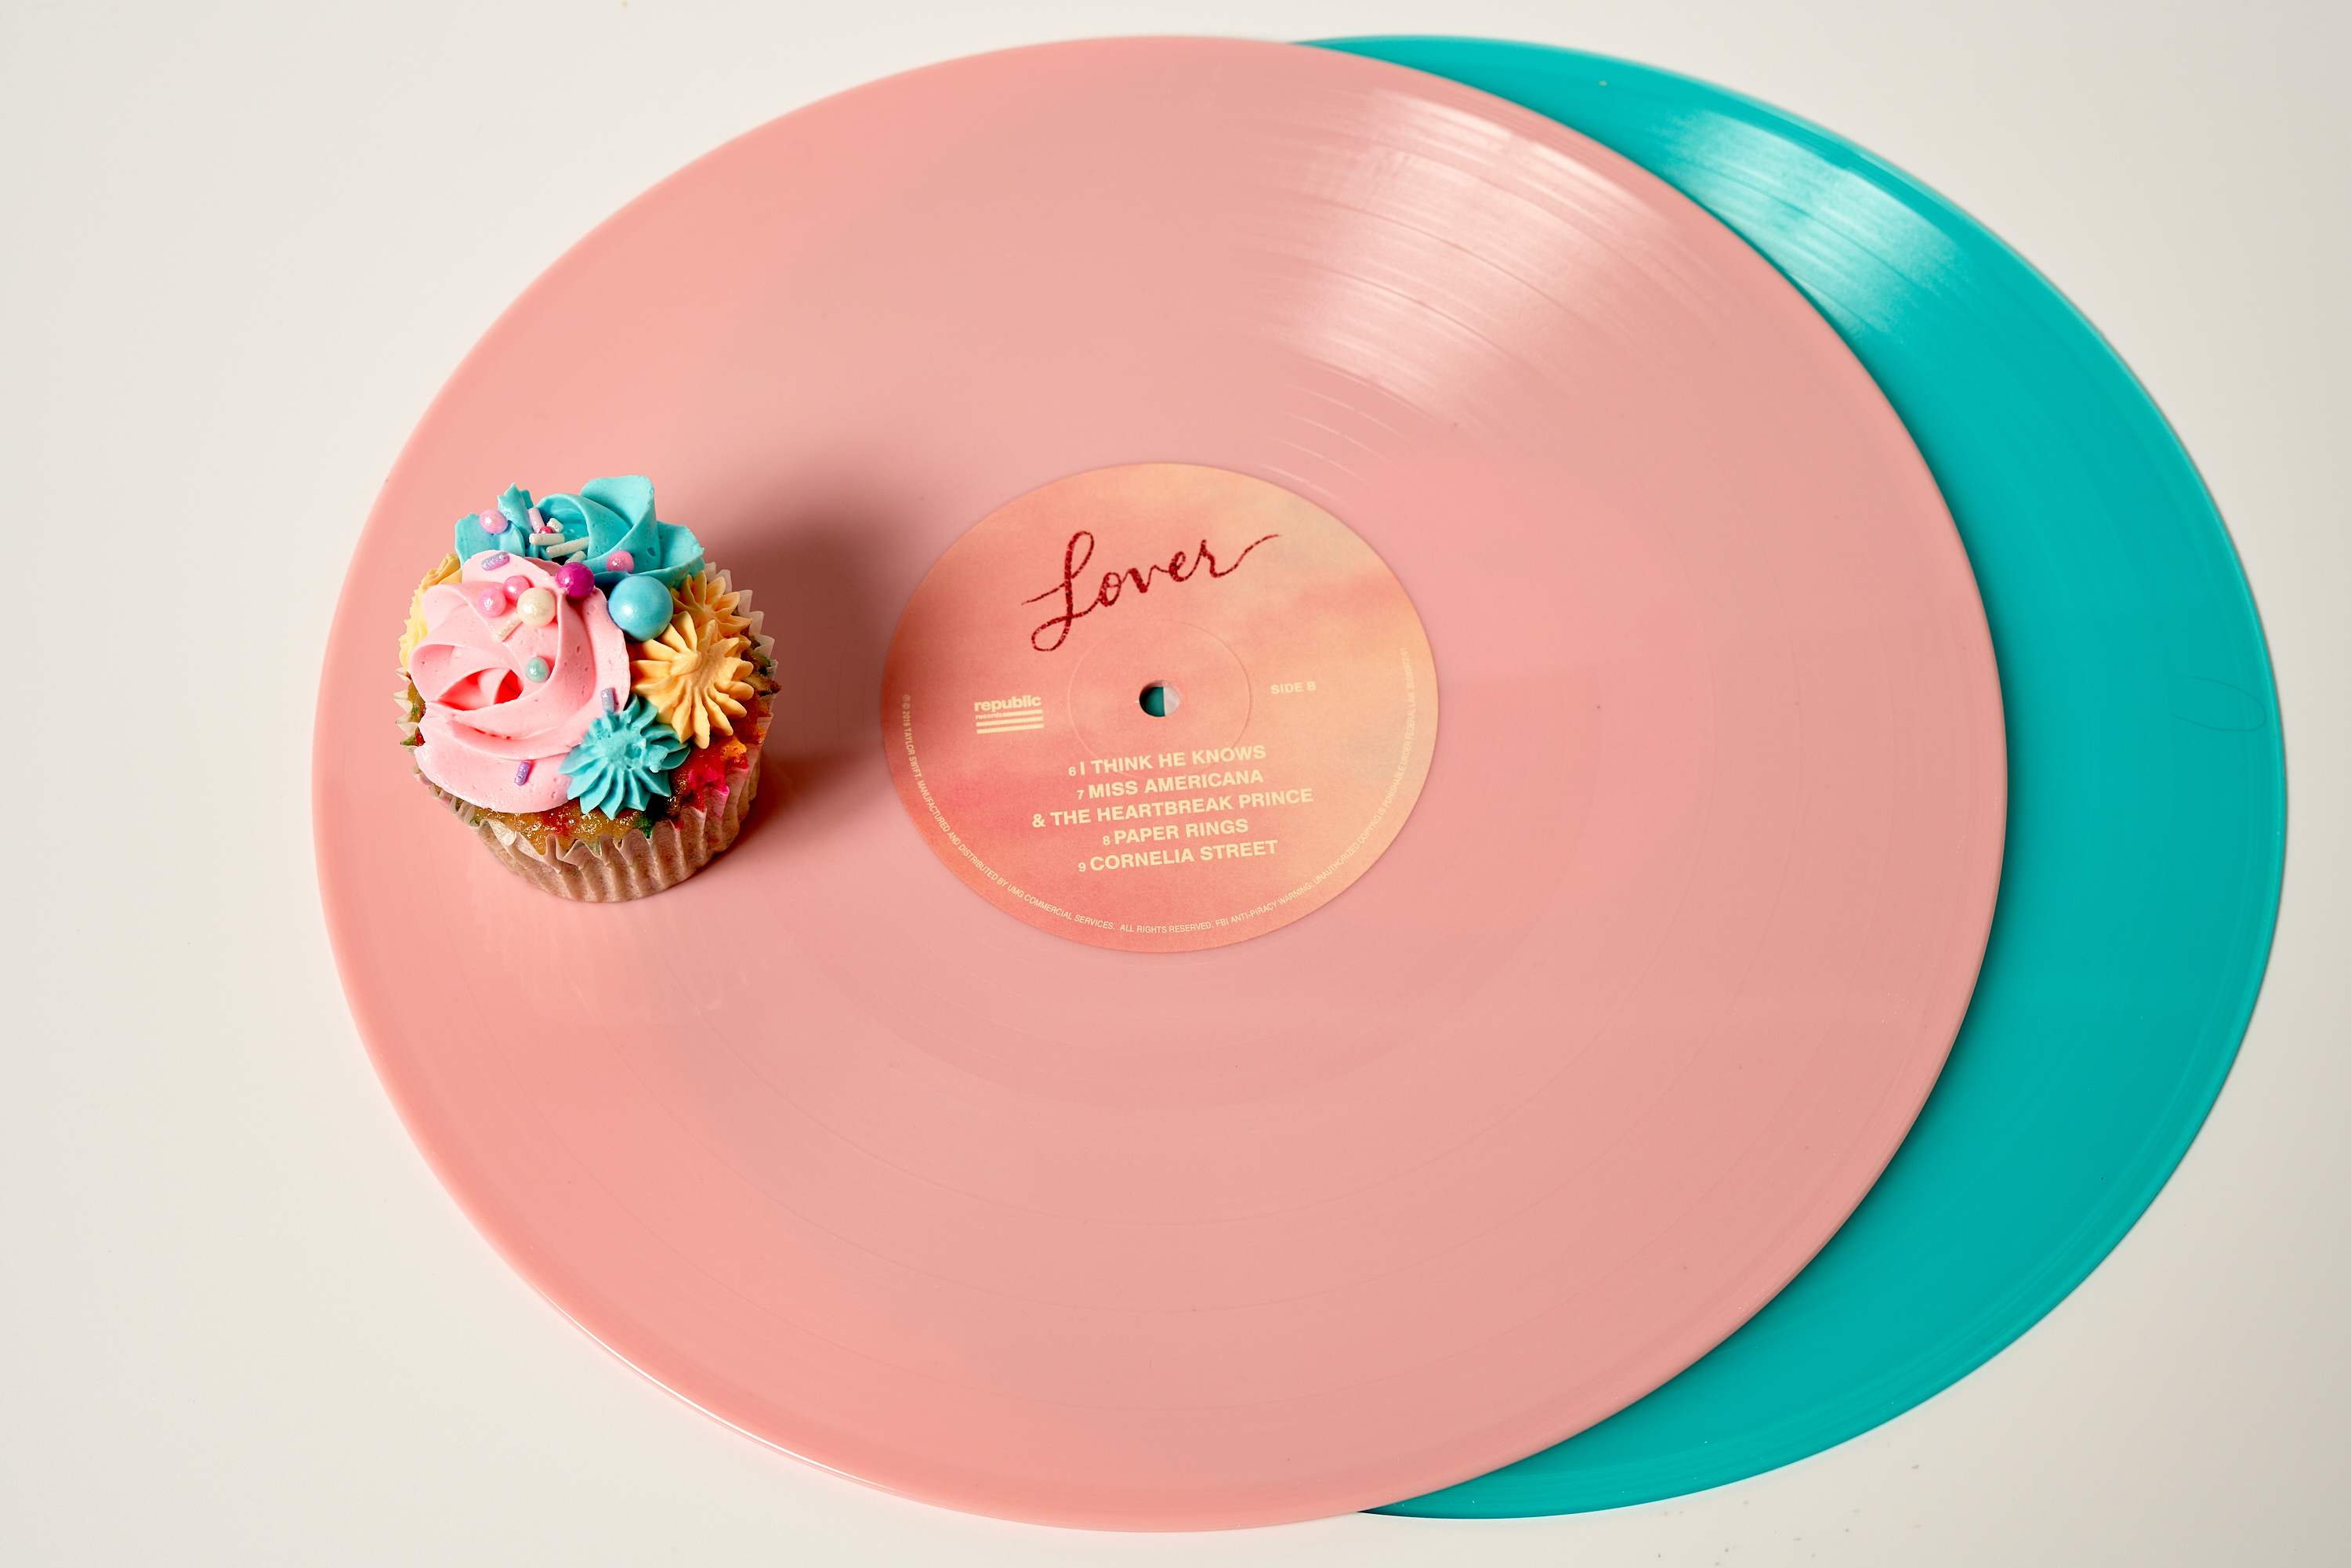 Bakery Sweet Lady Jane makes a pastel-toned cupcake and has it resting on a pink and teal record of Taylor Swift music.